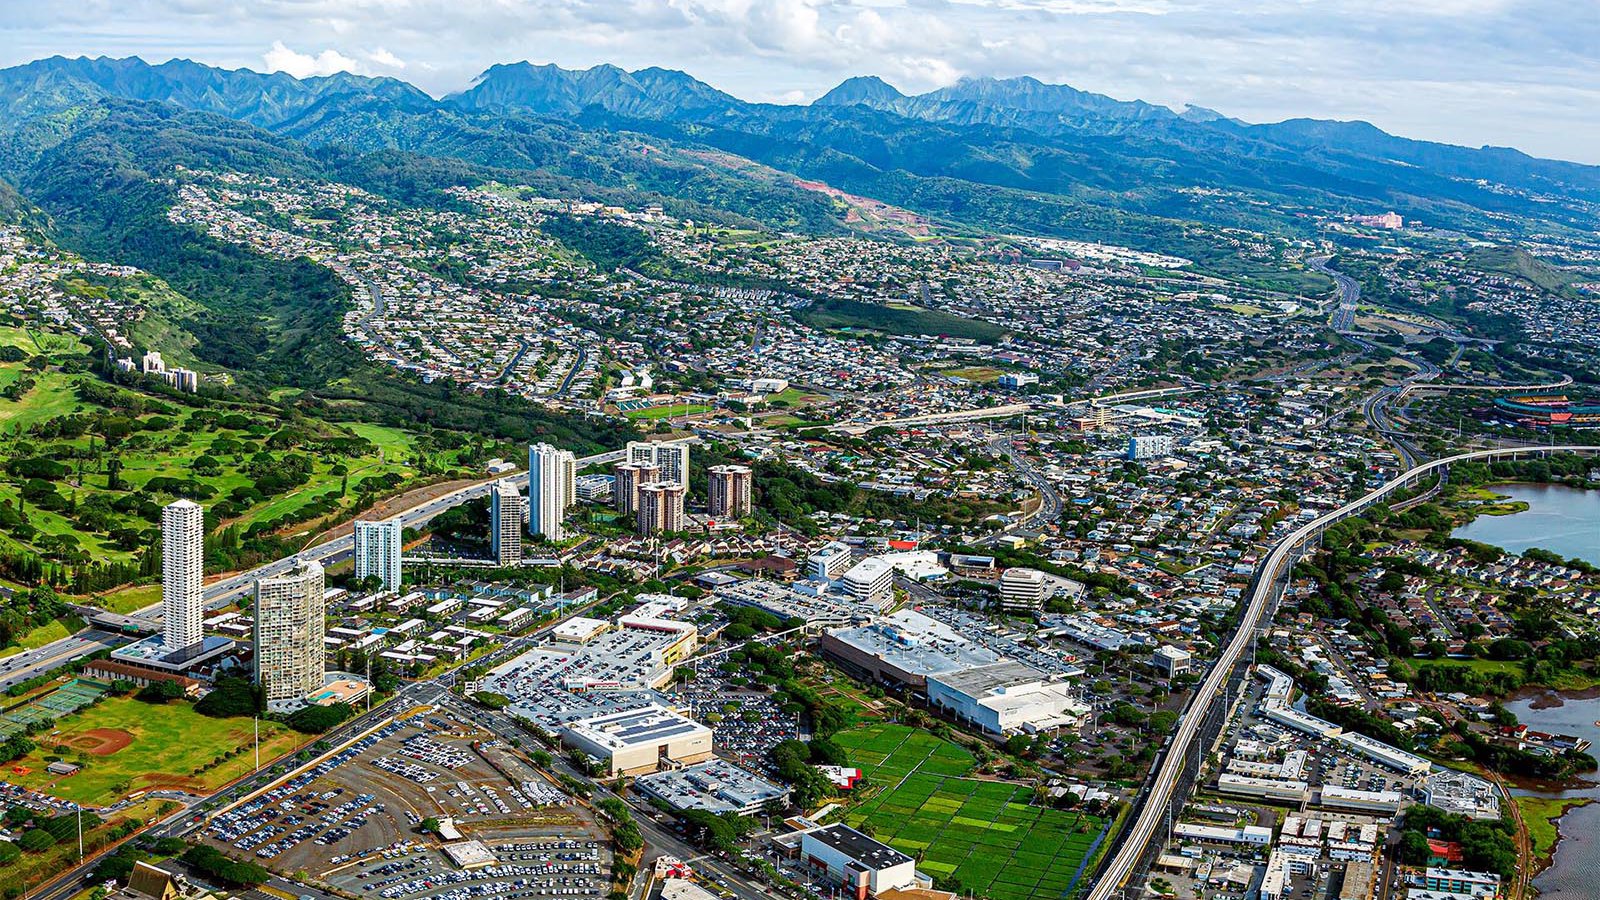 Services aerial photo of a shopping center in Honolulu, Oahu, Hawaii